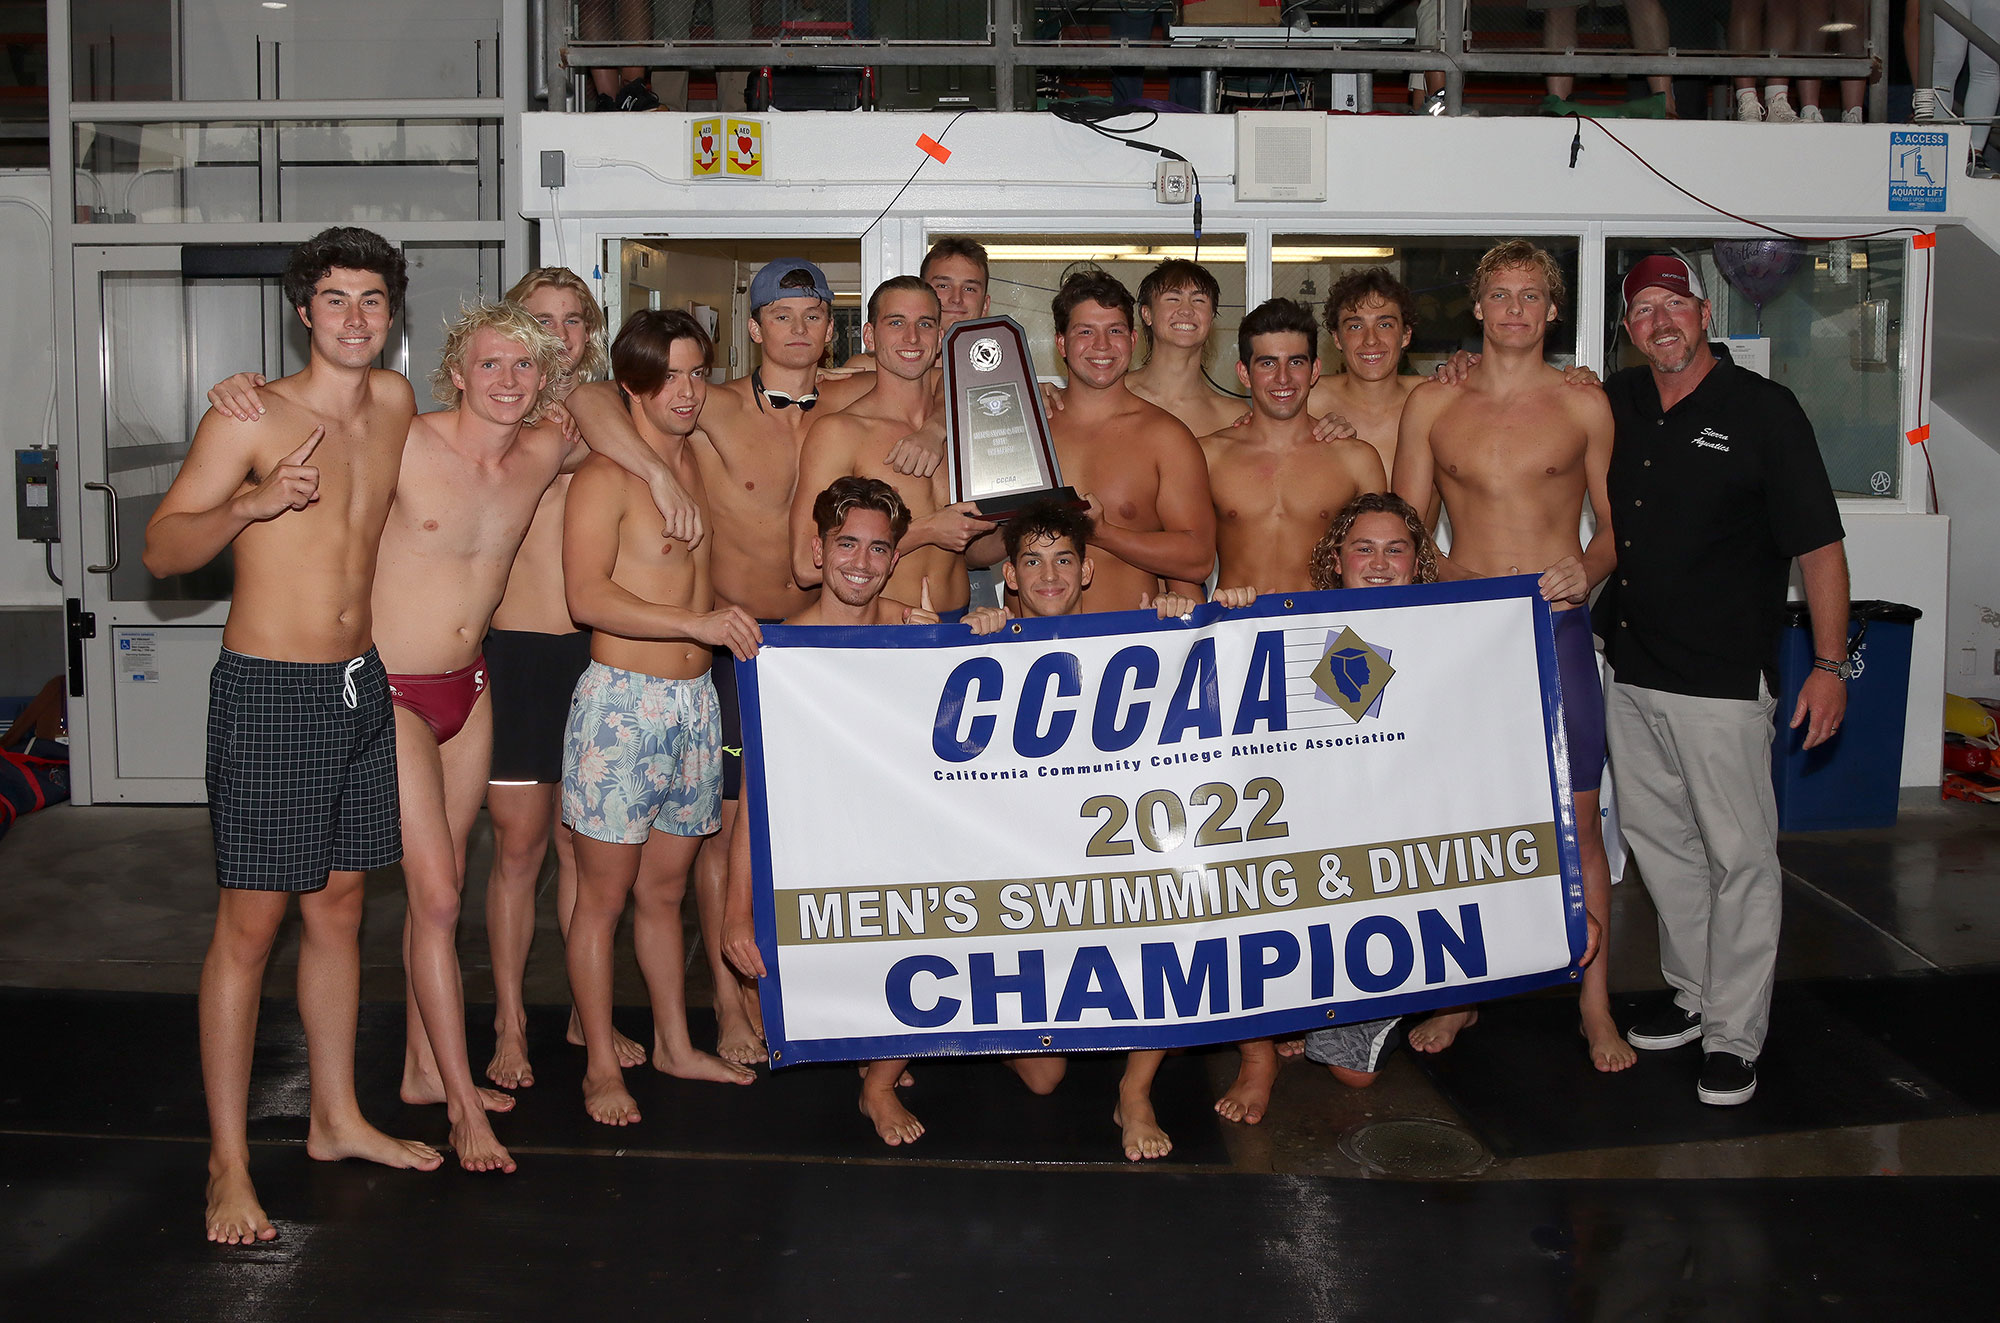 Group photo of Sierra College men's swimming team holding state champion banner